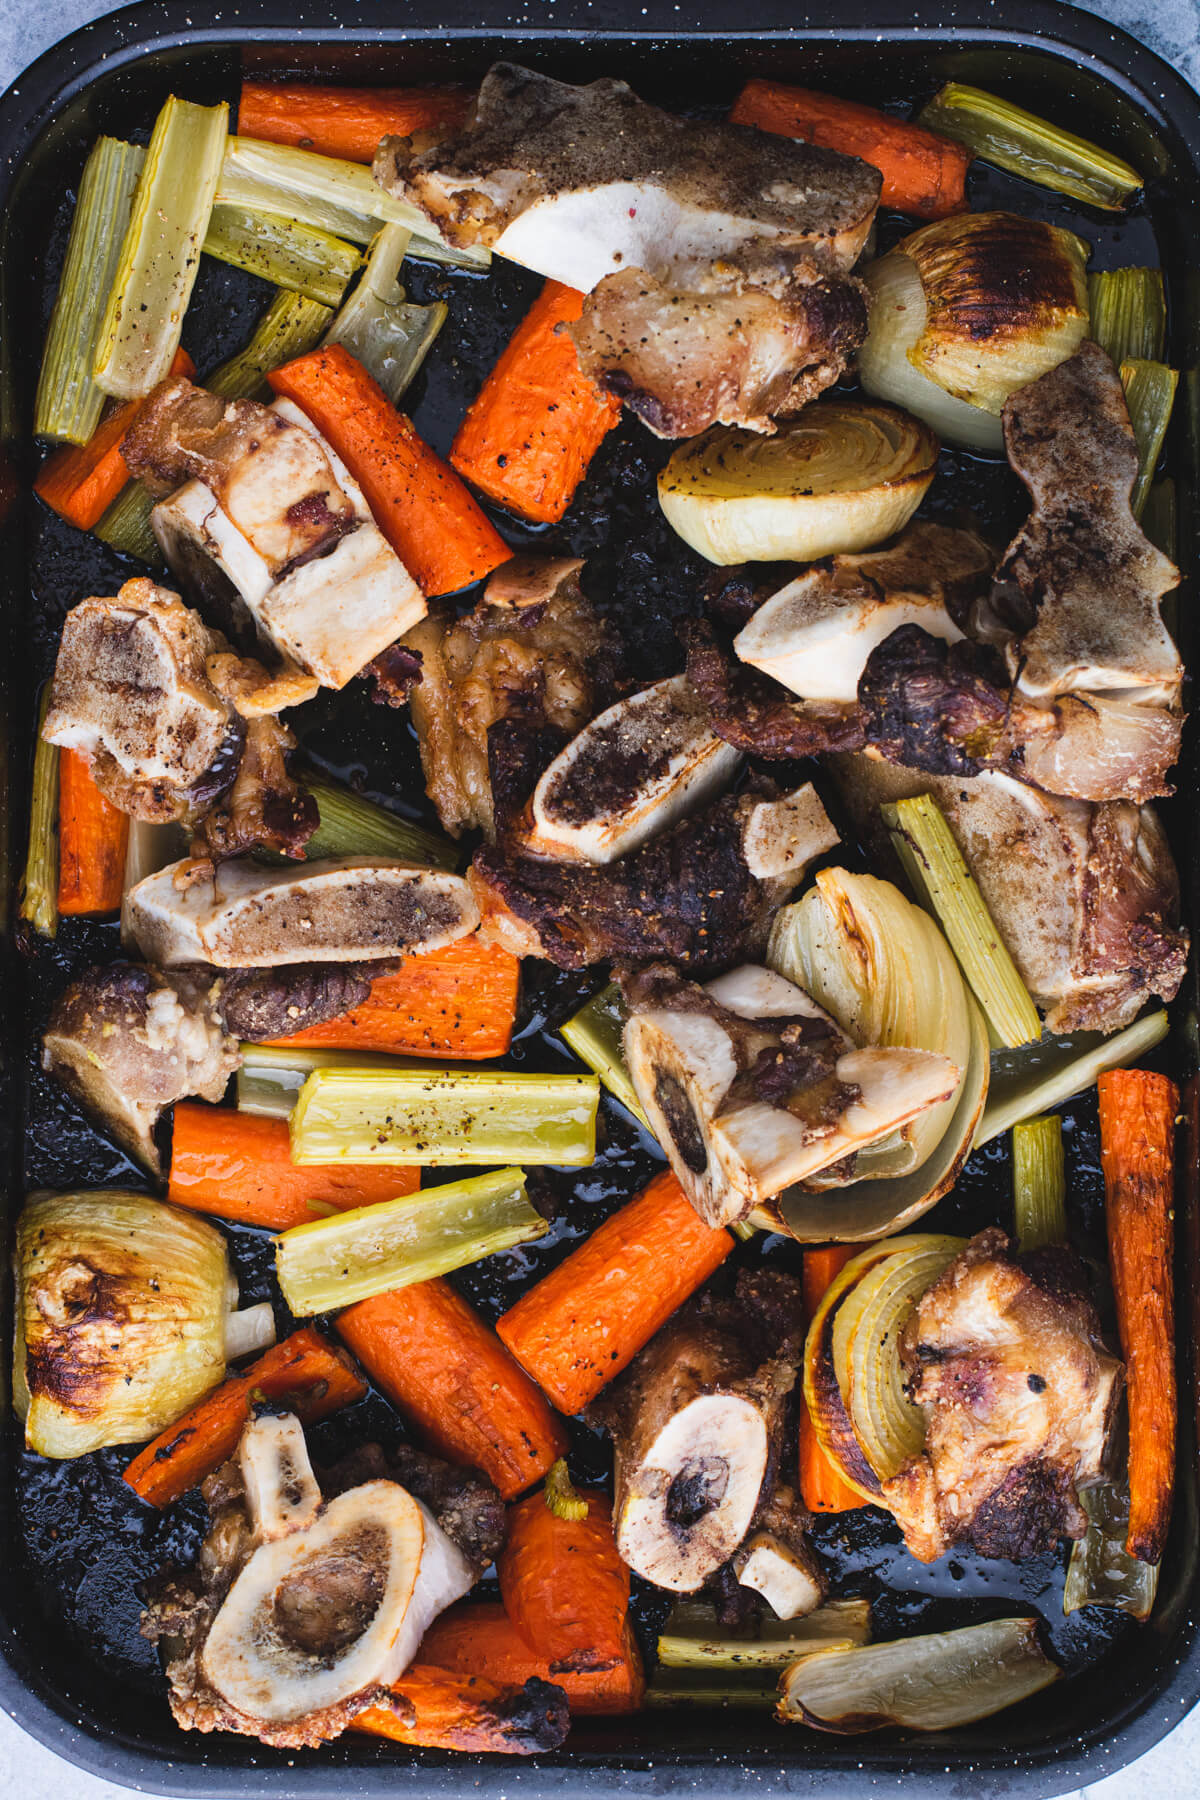 A dark pan filled with roasted vegetables and beef bones.